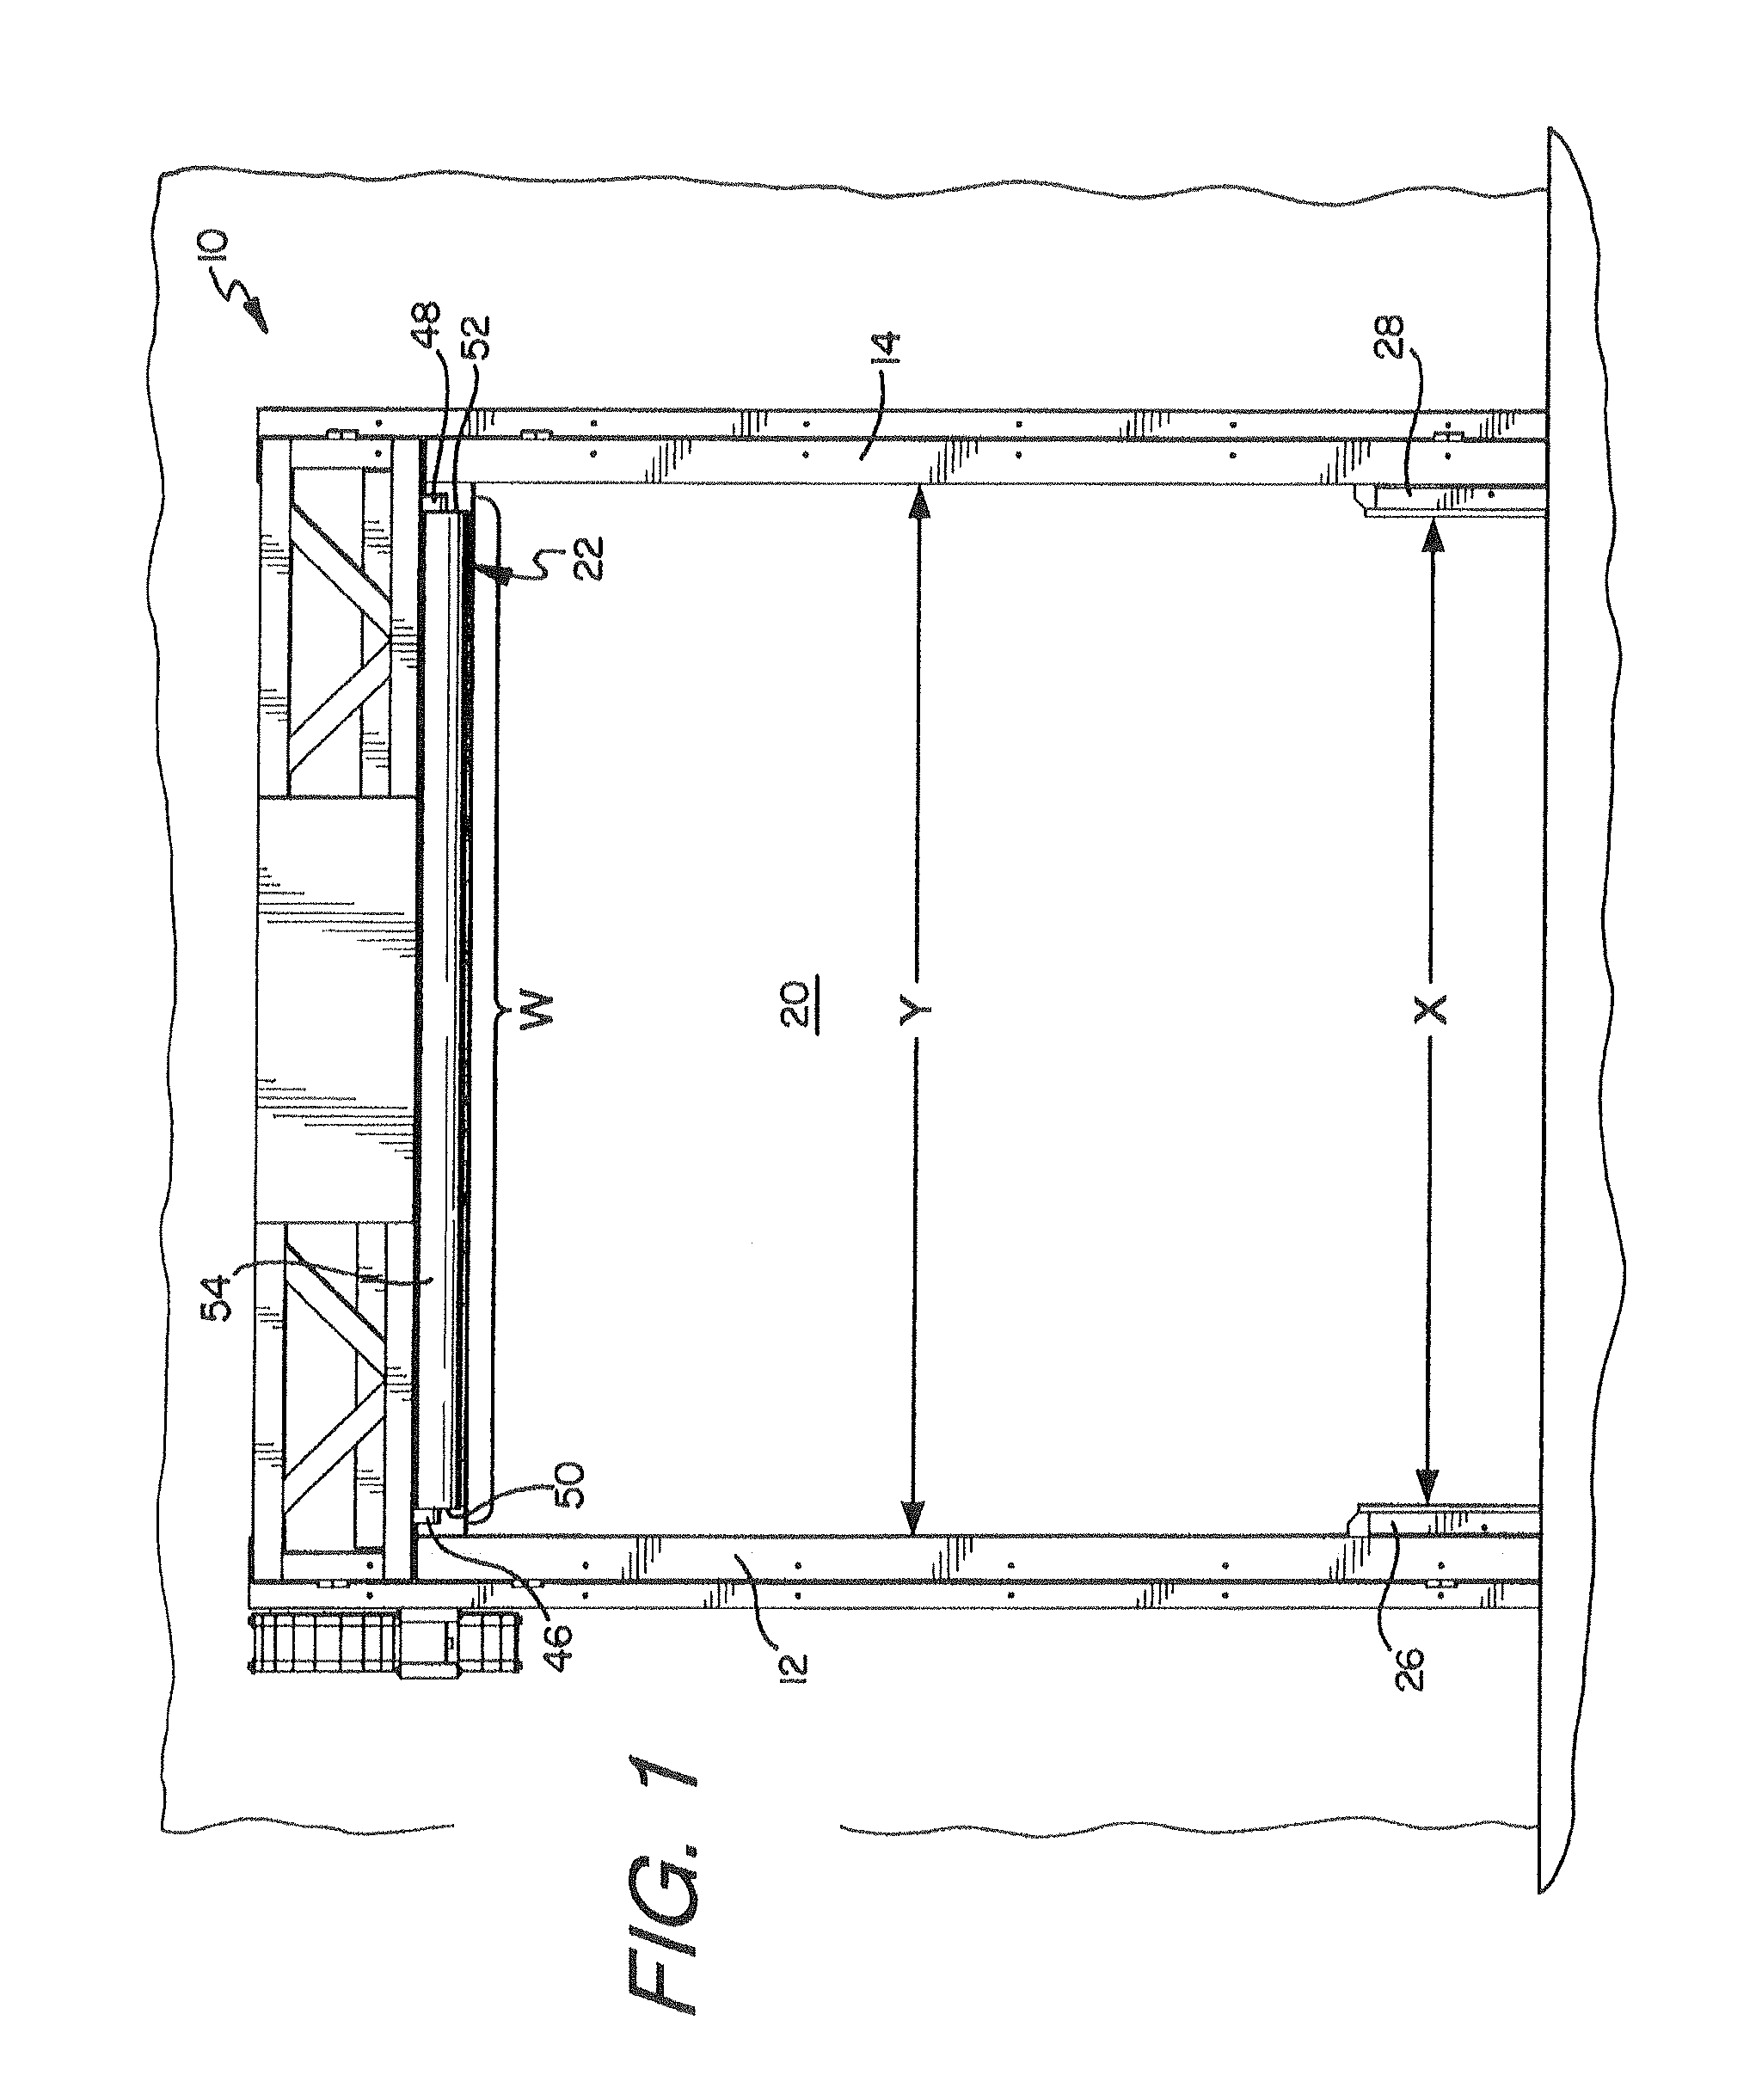 Device and method for increasing the wind load resistance and disengage-ability of overhead roll-up doors